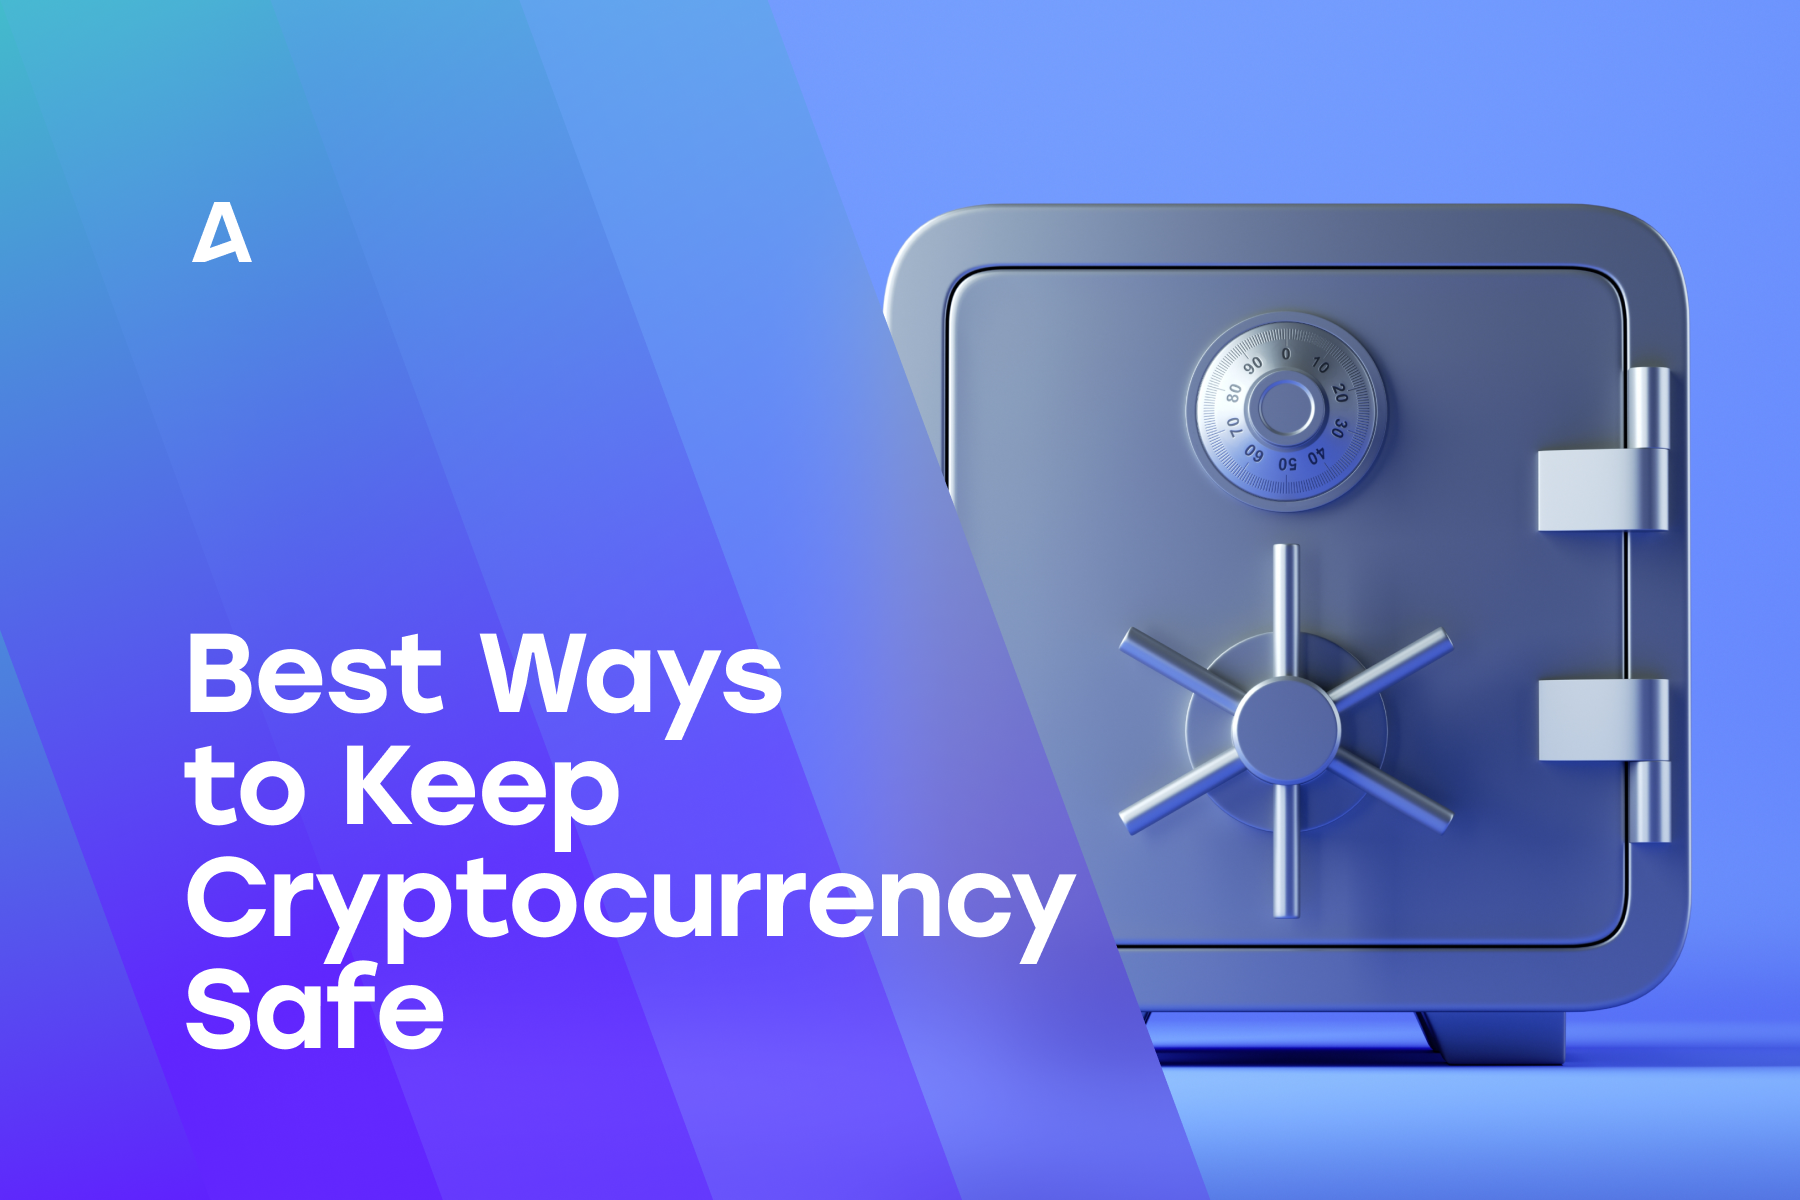 How to Keep Your Cryptocurrency Safe